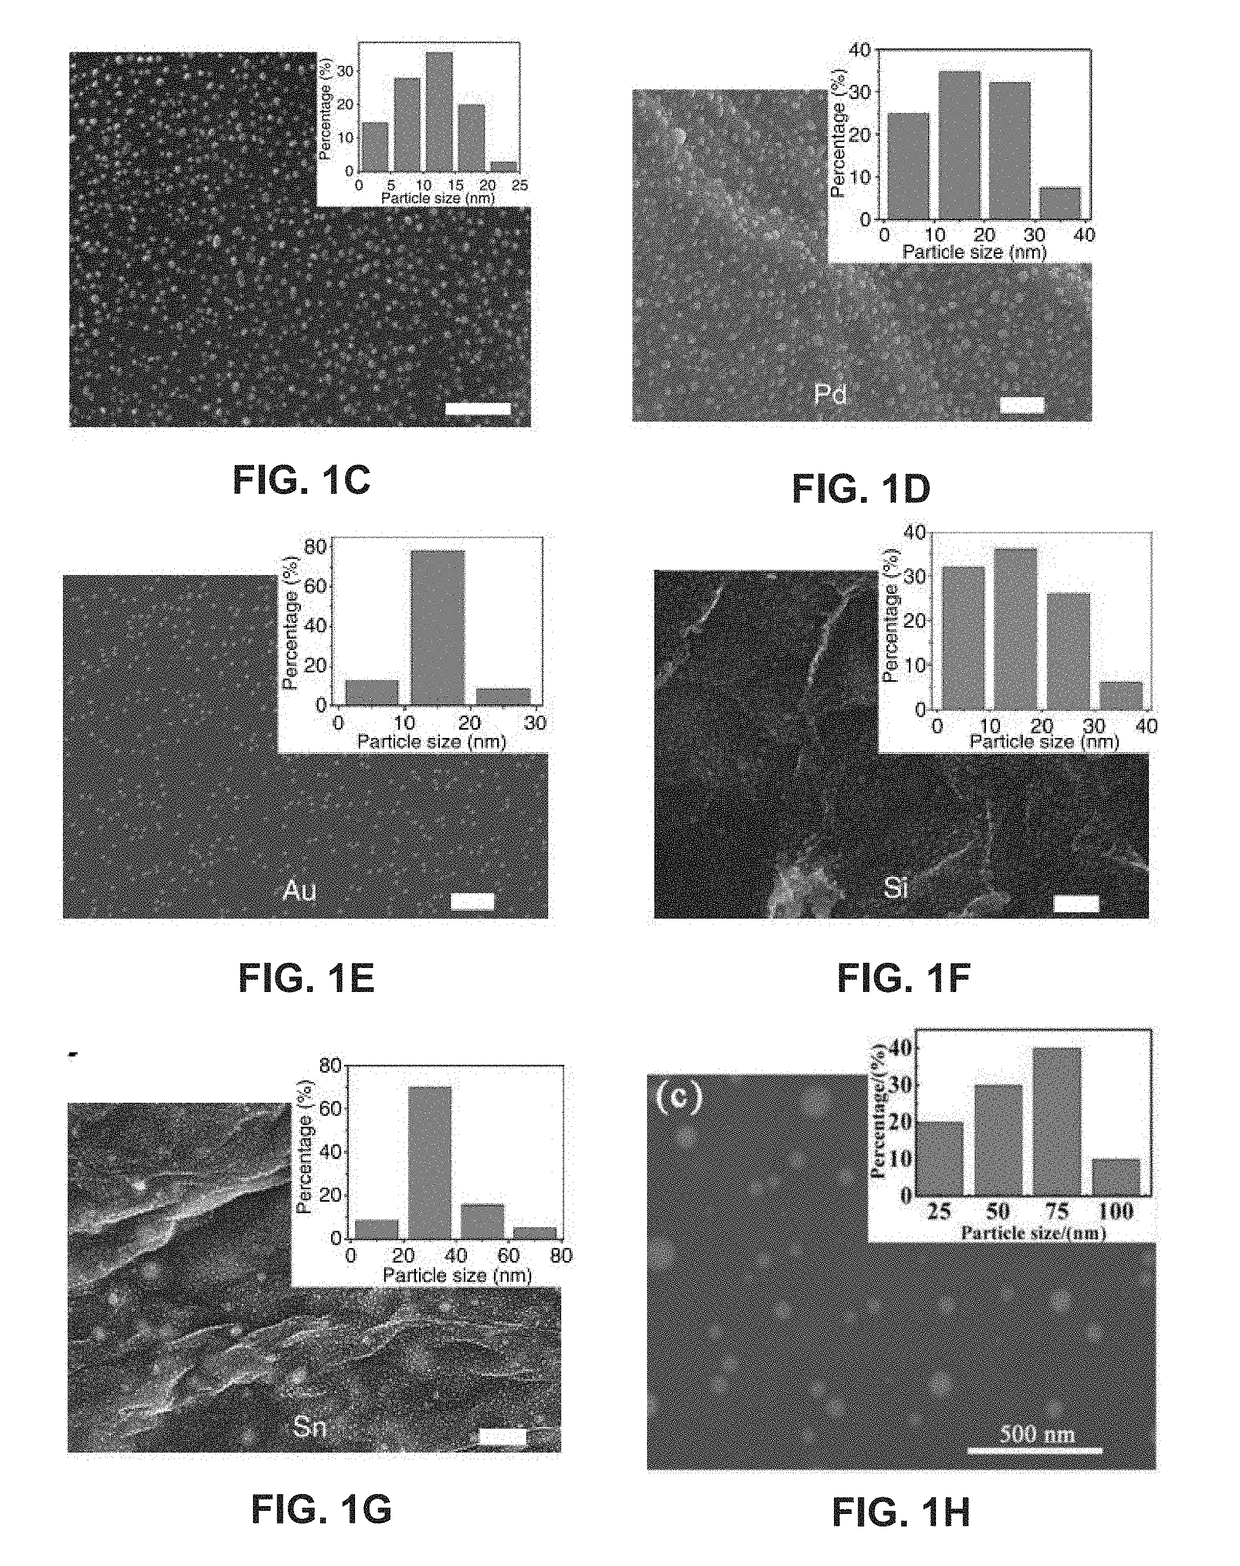 Nanoparticles and systems and methods for synthesizing nanoparticles through thermal shock